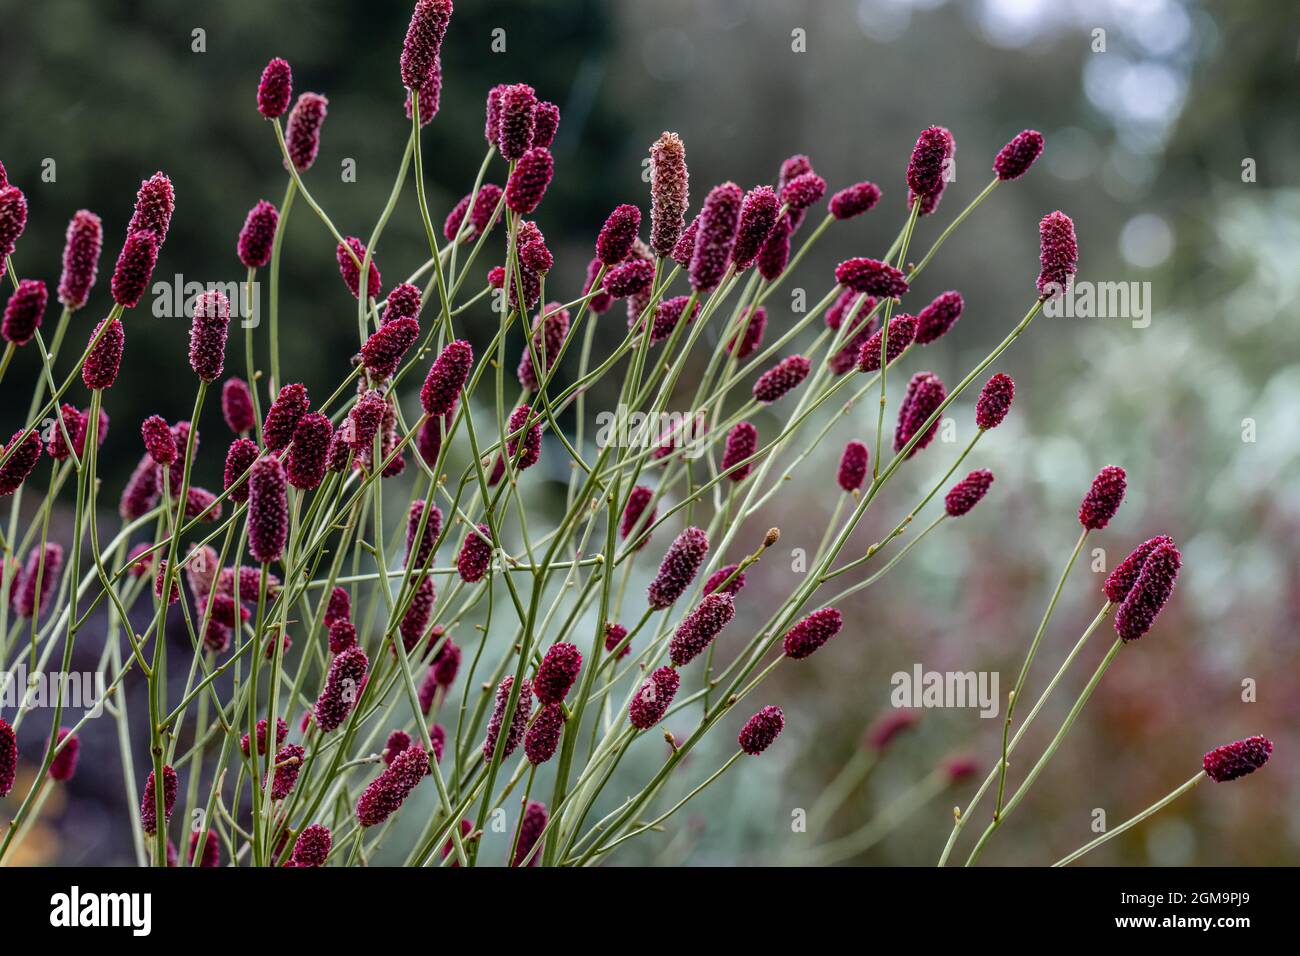 Mass of Sanguisorba Cangshan Cranberry flowers in summer Stock Photo